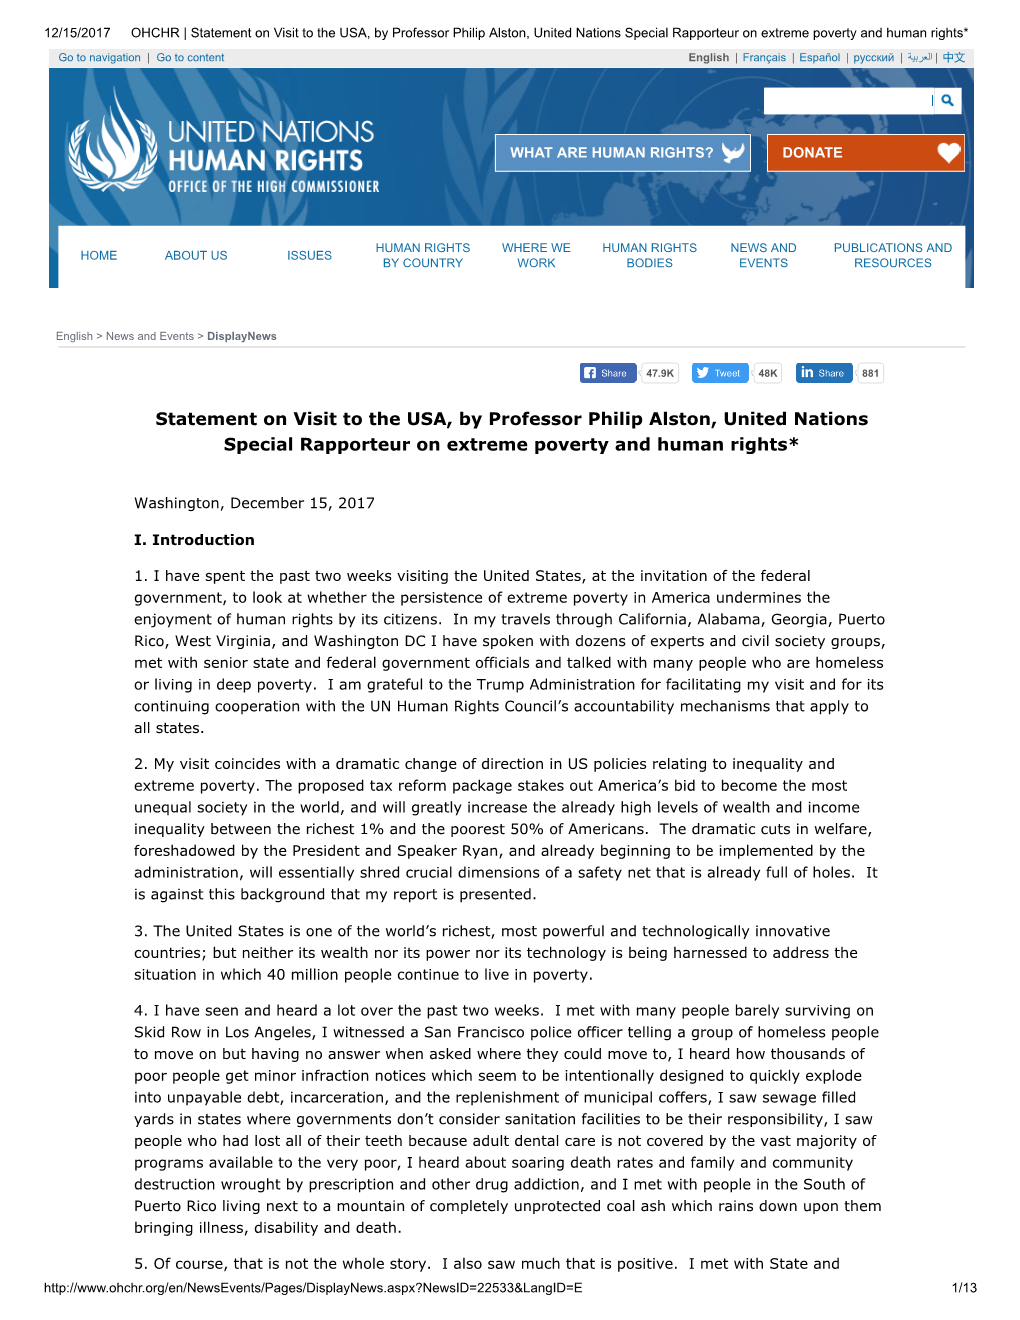 Statement on Visit to the USA, by Professor Philip Alston, United Nations Special Rapporteur on Extreme Poverty and Human Rights*